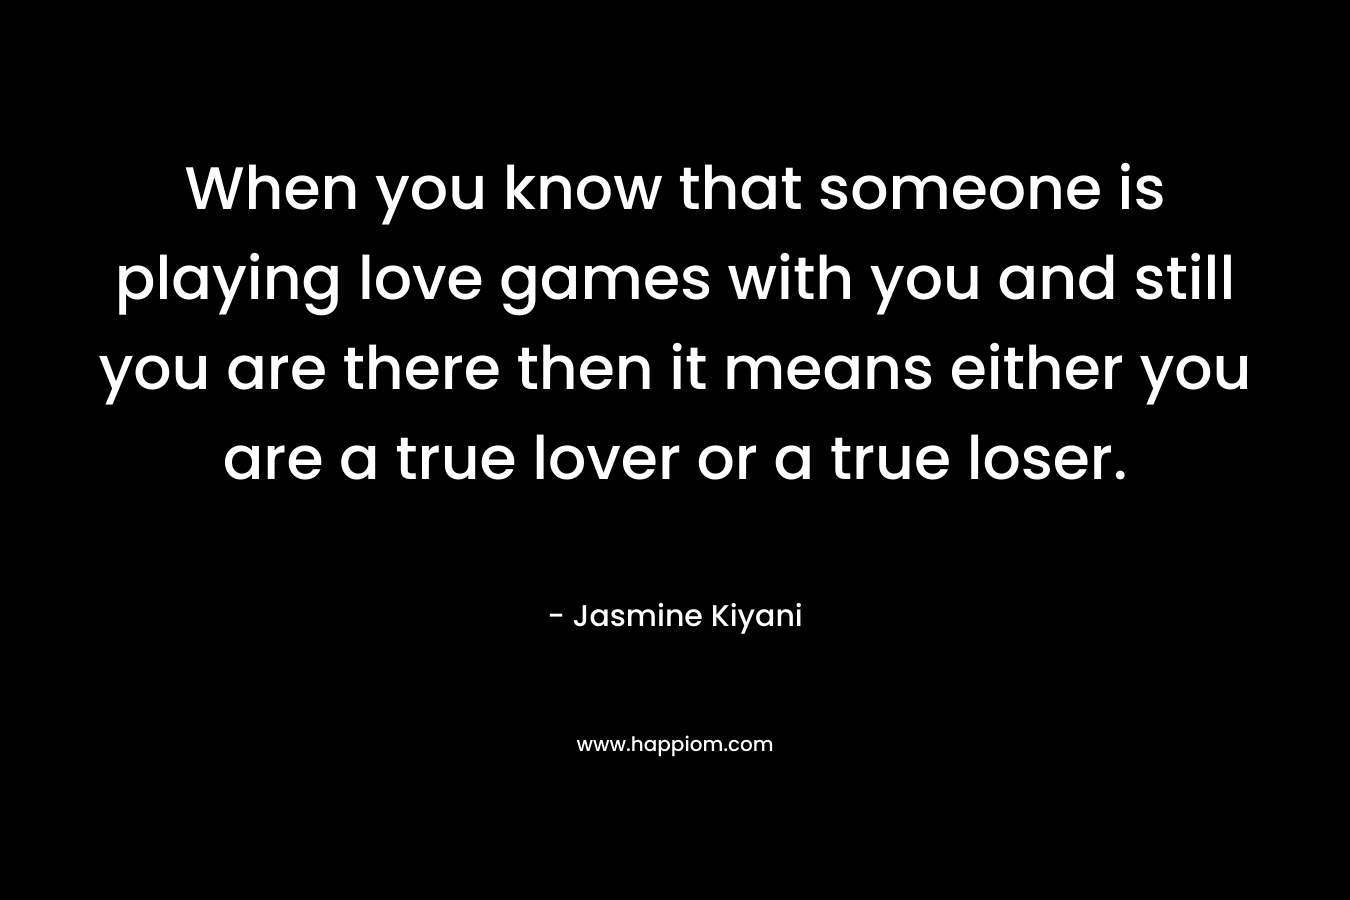 When you know that someone is playing love games with you and still you are there then it means either you are a true lover or a true loser. – Jasmine Kiyani